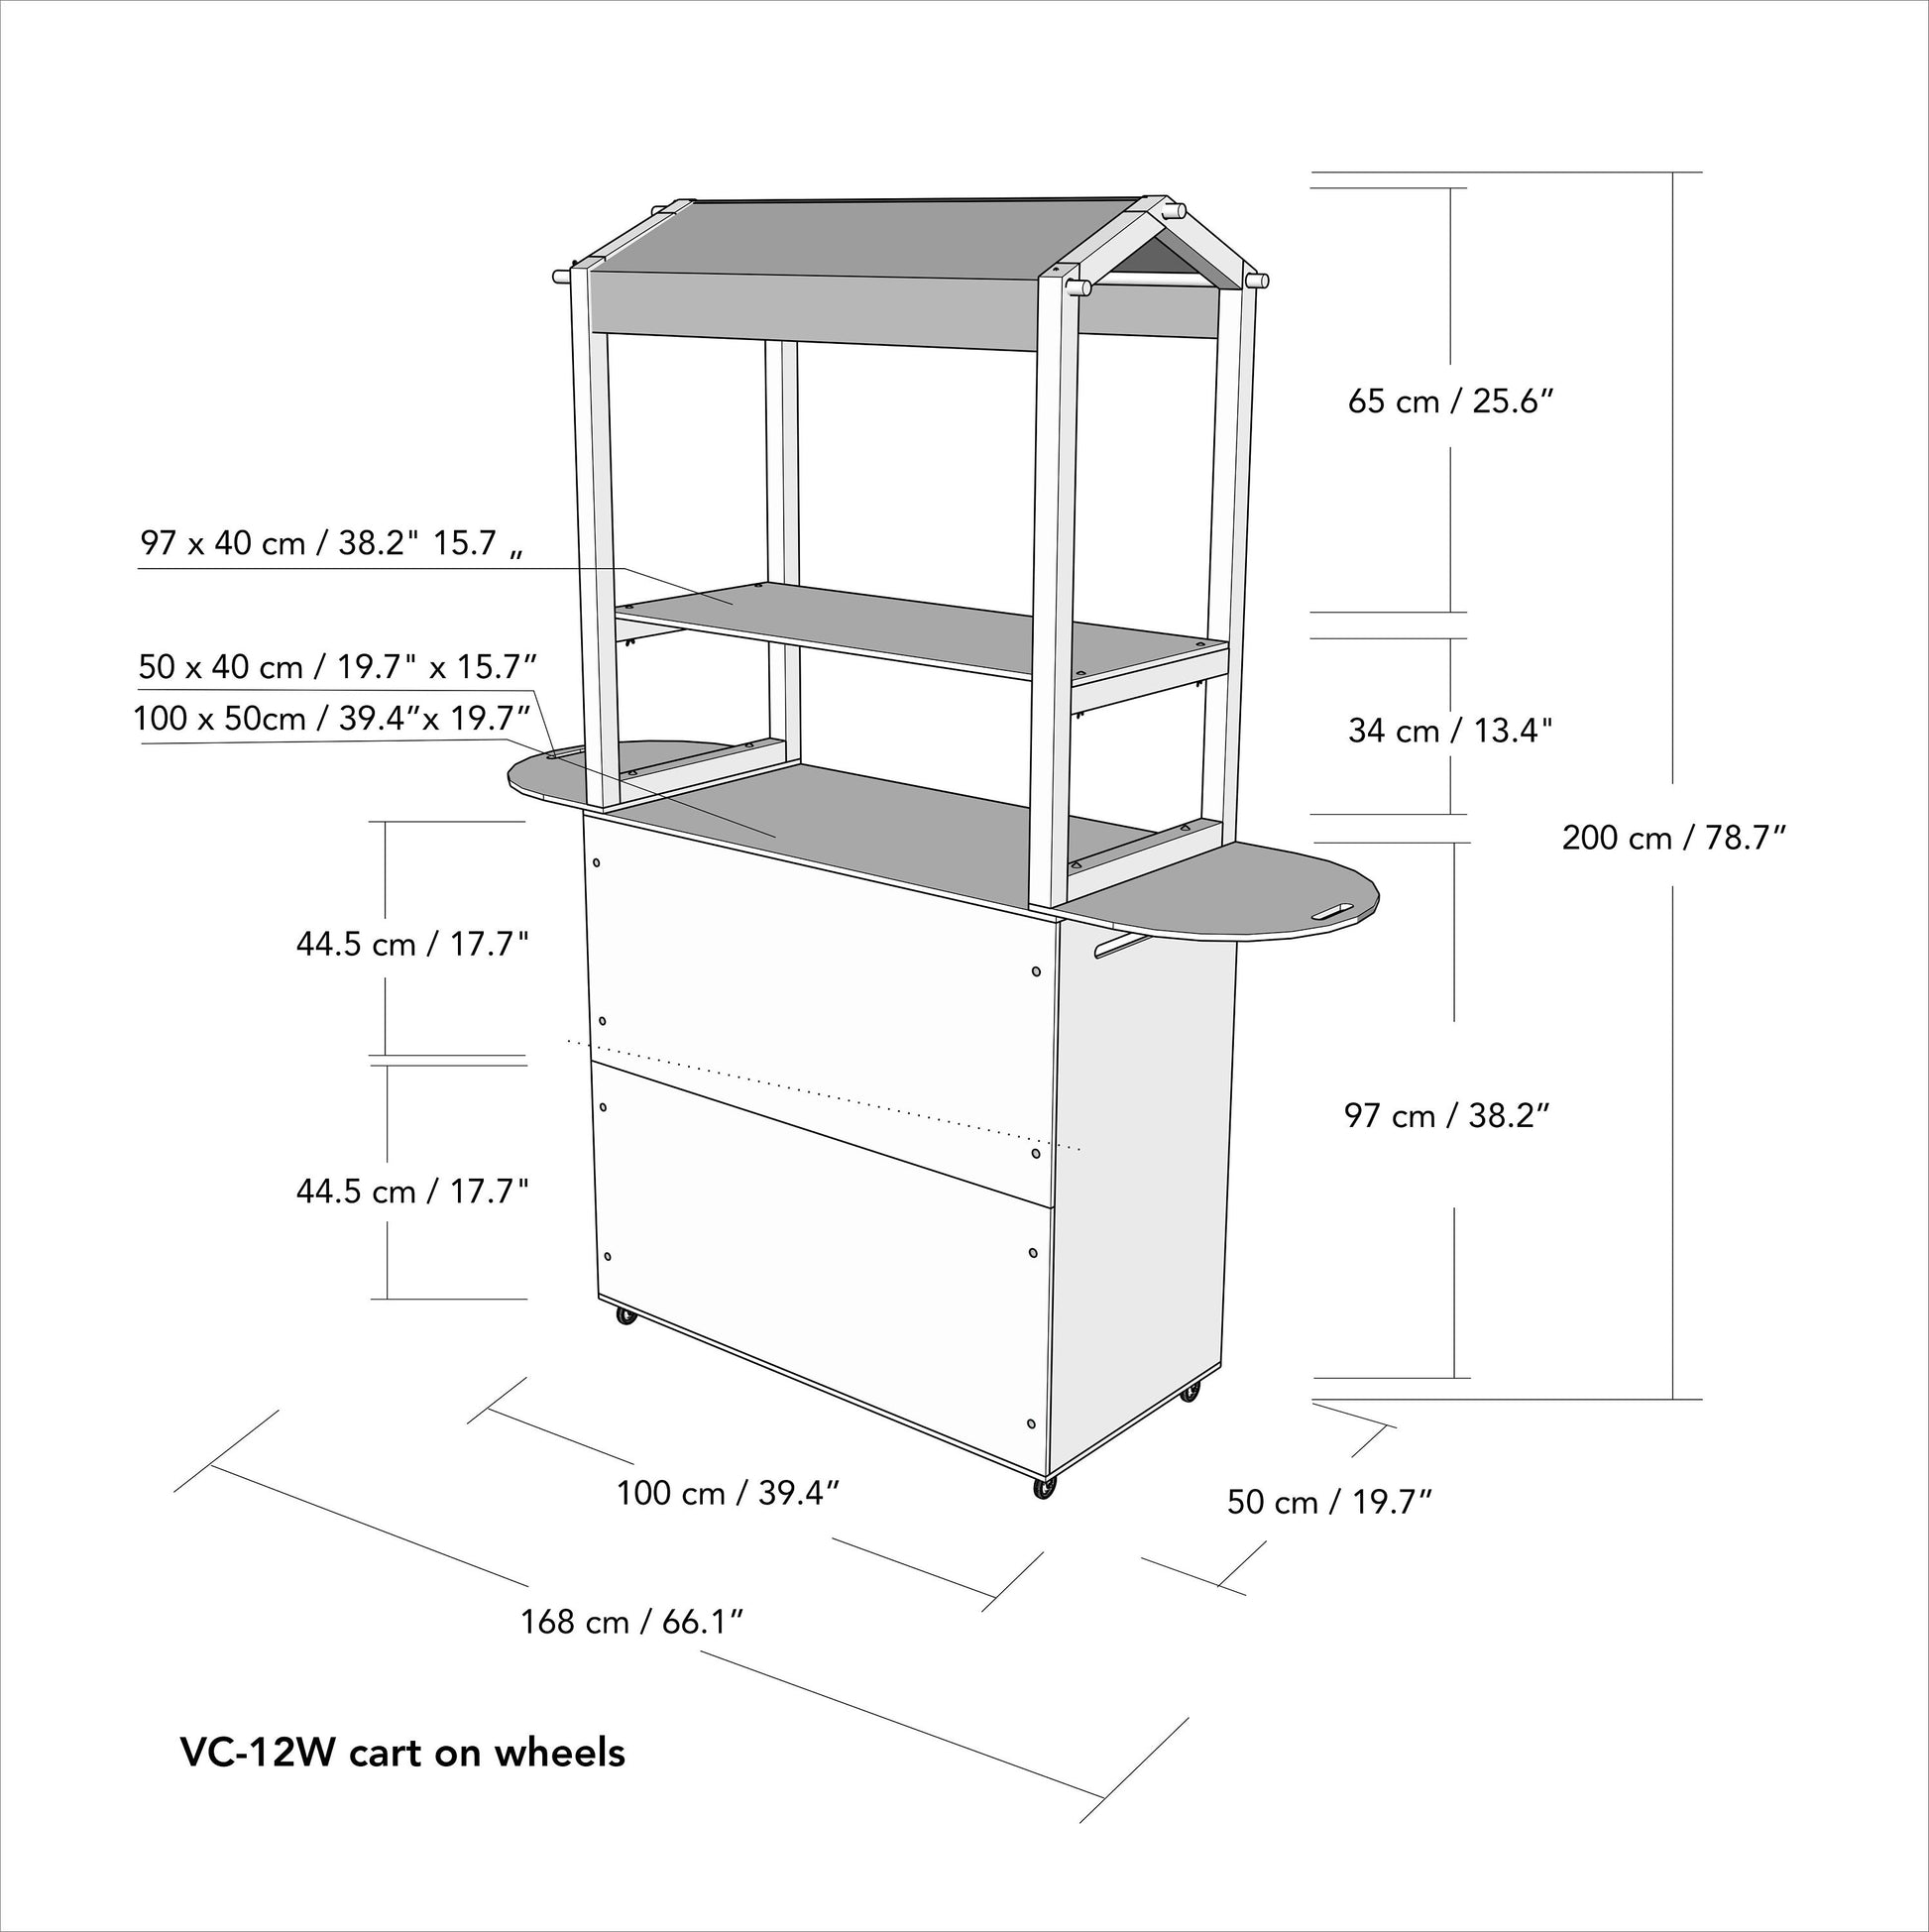 Special Edition Black and White Promotional Cart VC-12-W-WT in white color | collapsible checkout stand with sliding door and lock